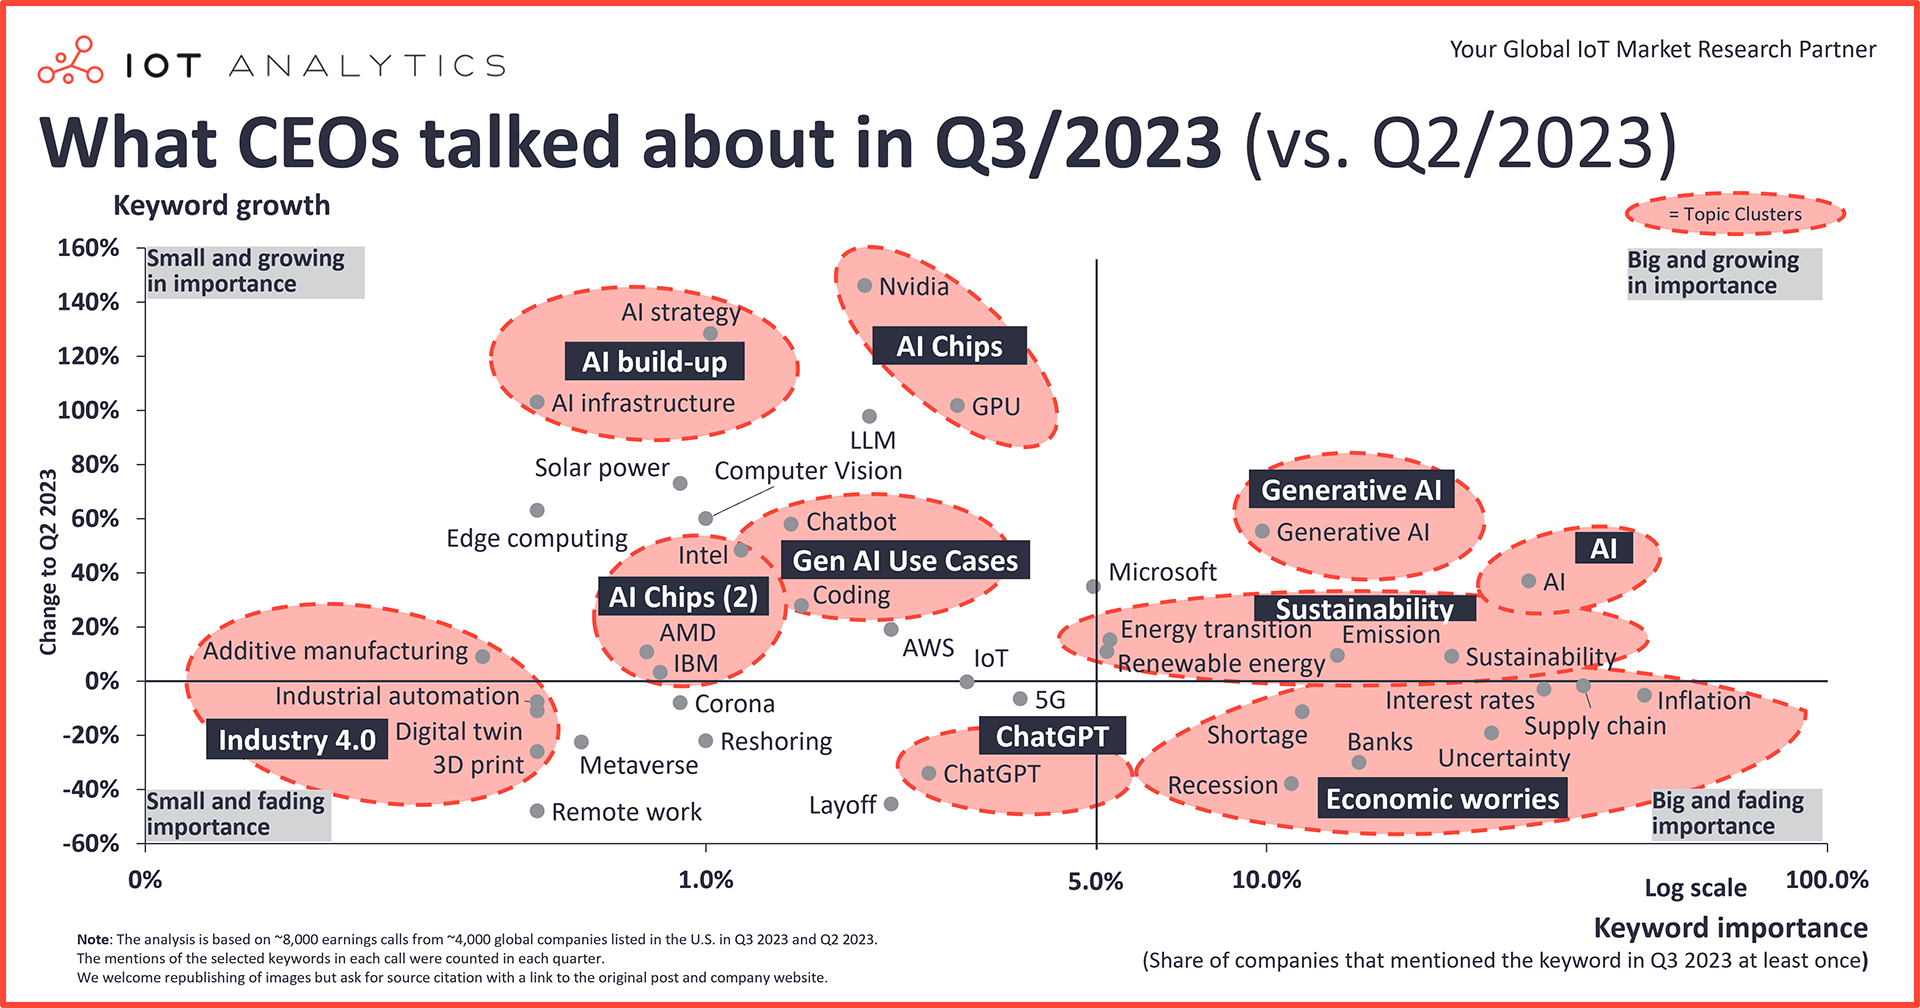 graphic: What CEOs talked about in Q3-2023 vs Q2-2023